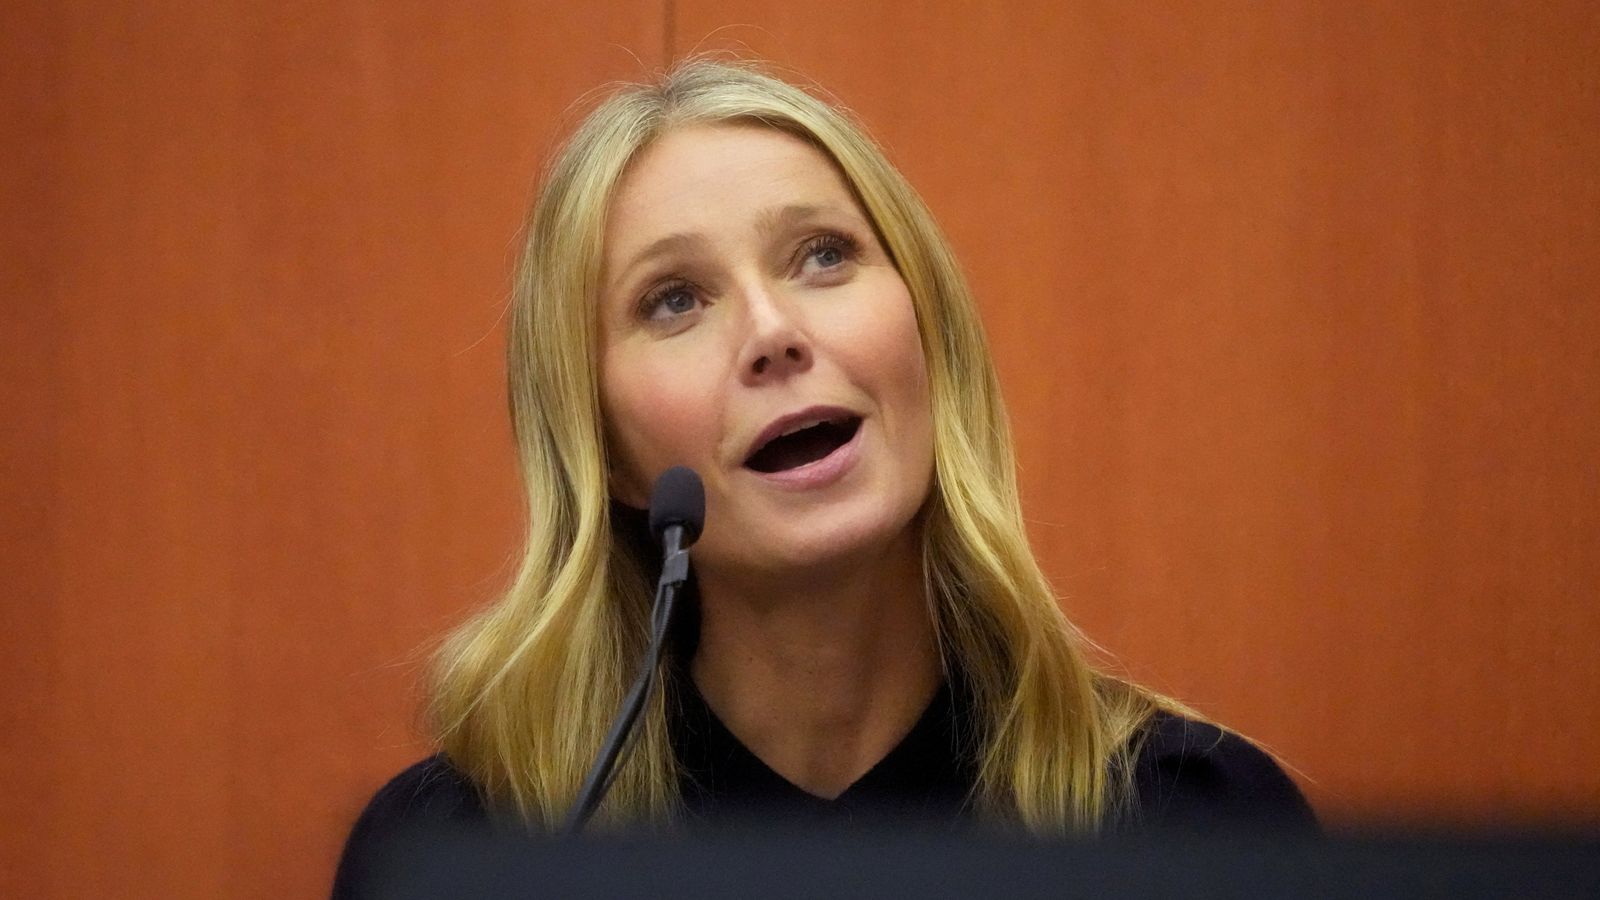 Gwyneth Paltrow tells court she thought collision on ski slope was a sex assault